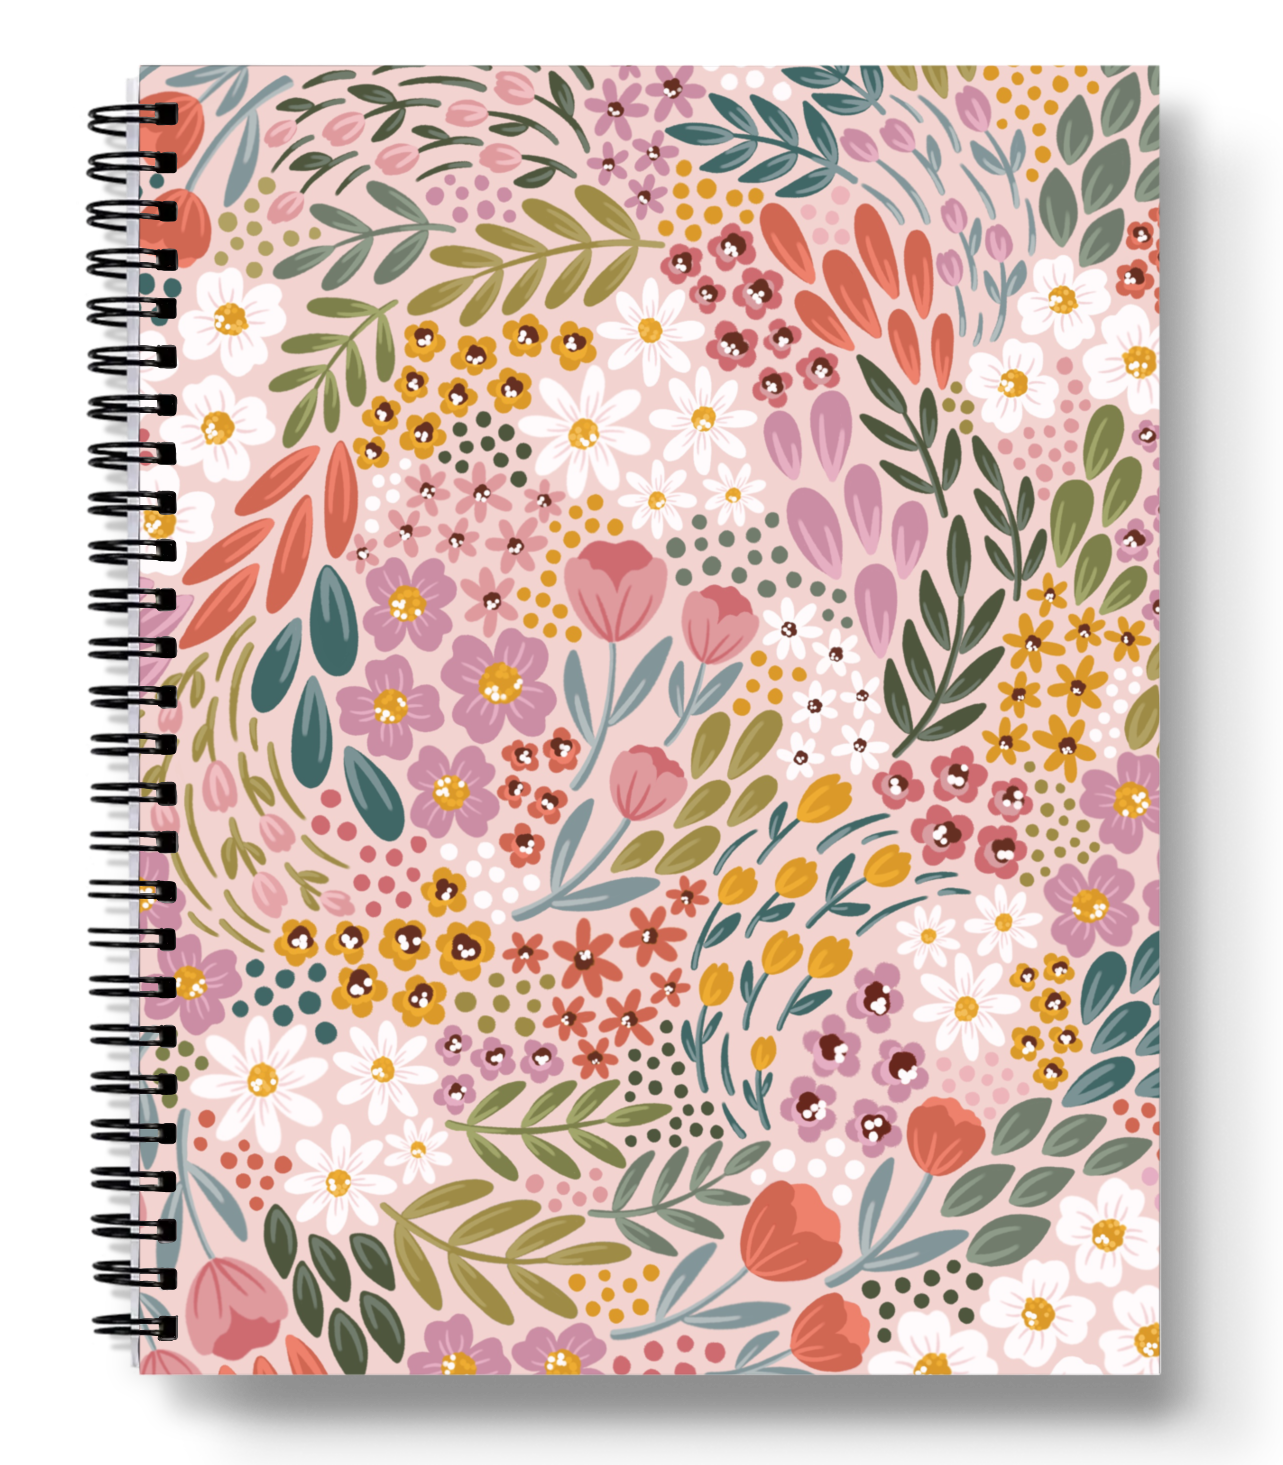 Summer Meadows Spiral Lined Notebook 8.5x11in.